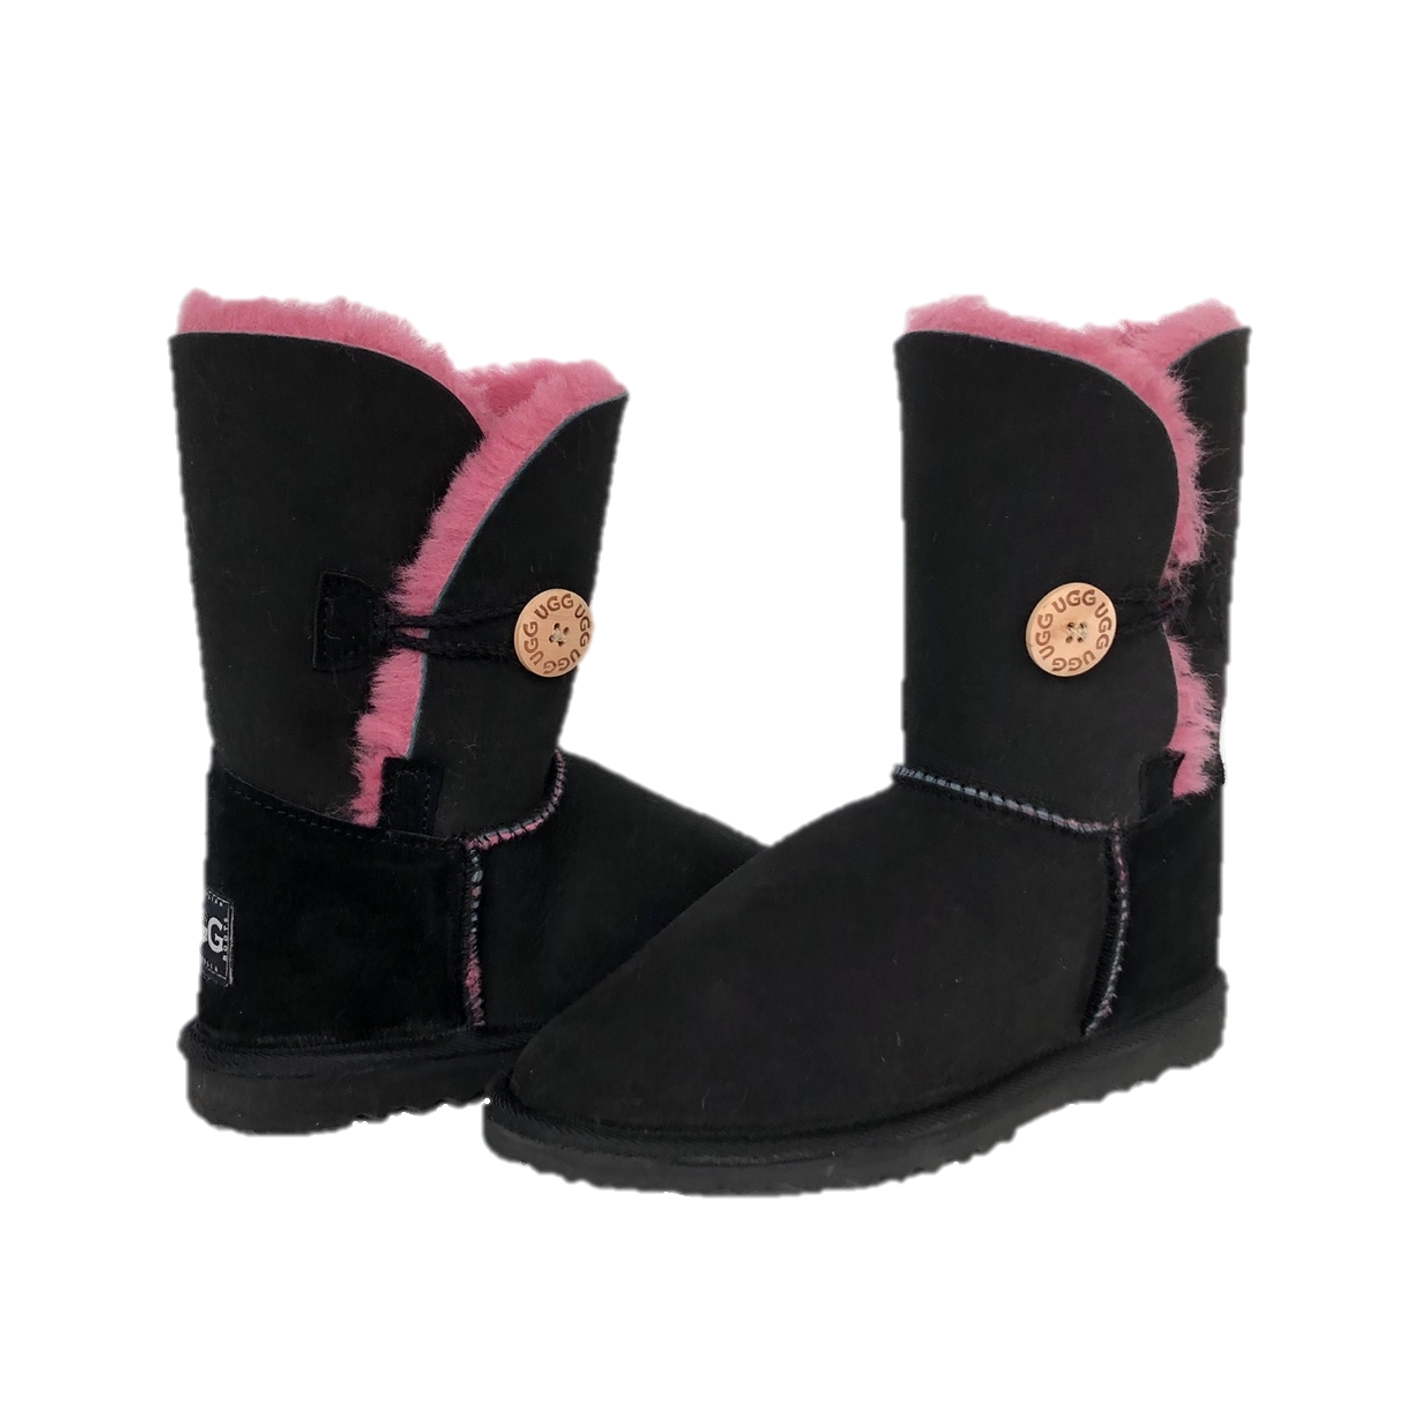 Black Cherry Bella Button Boots short boots with circle button